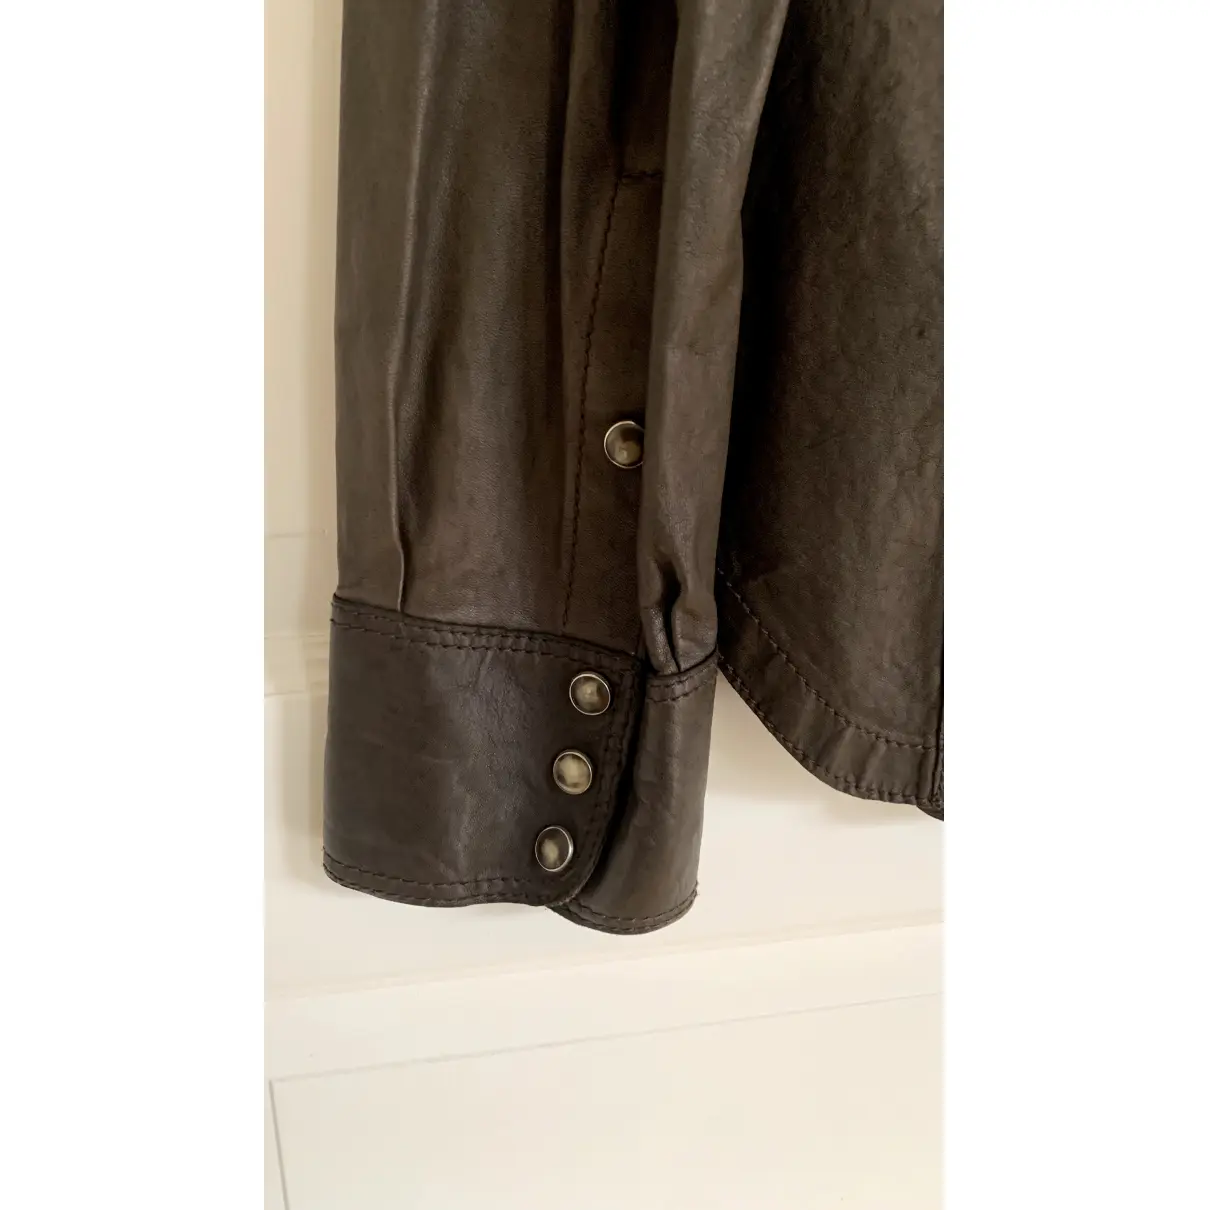 Buy Orciani Leather shirt online